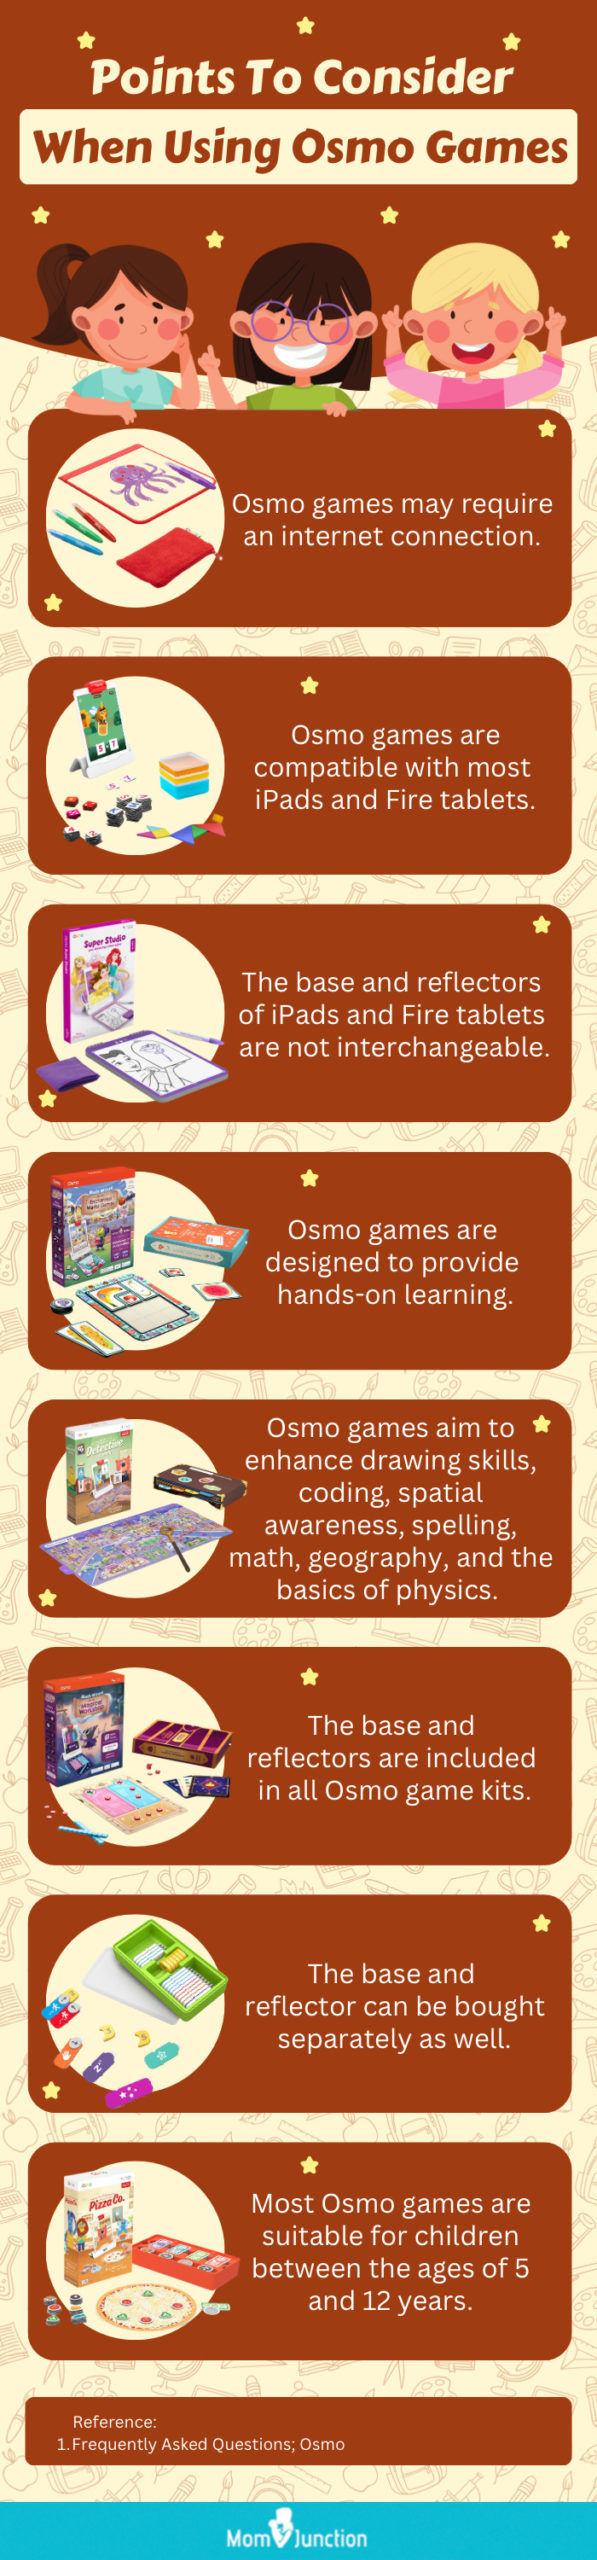 Points To Consider When Using Osmo Games